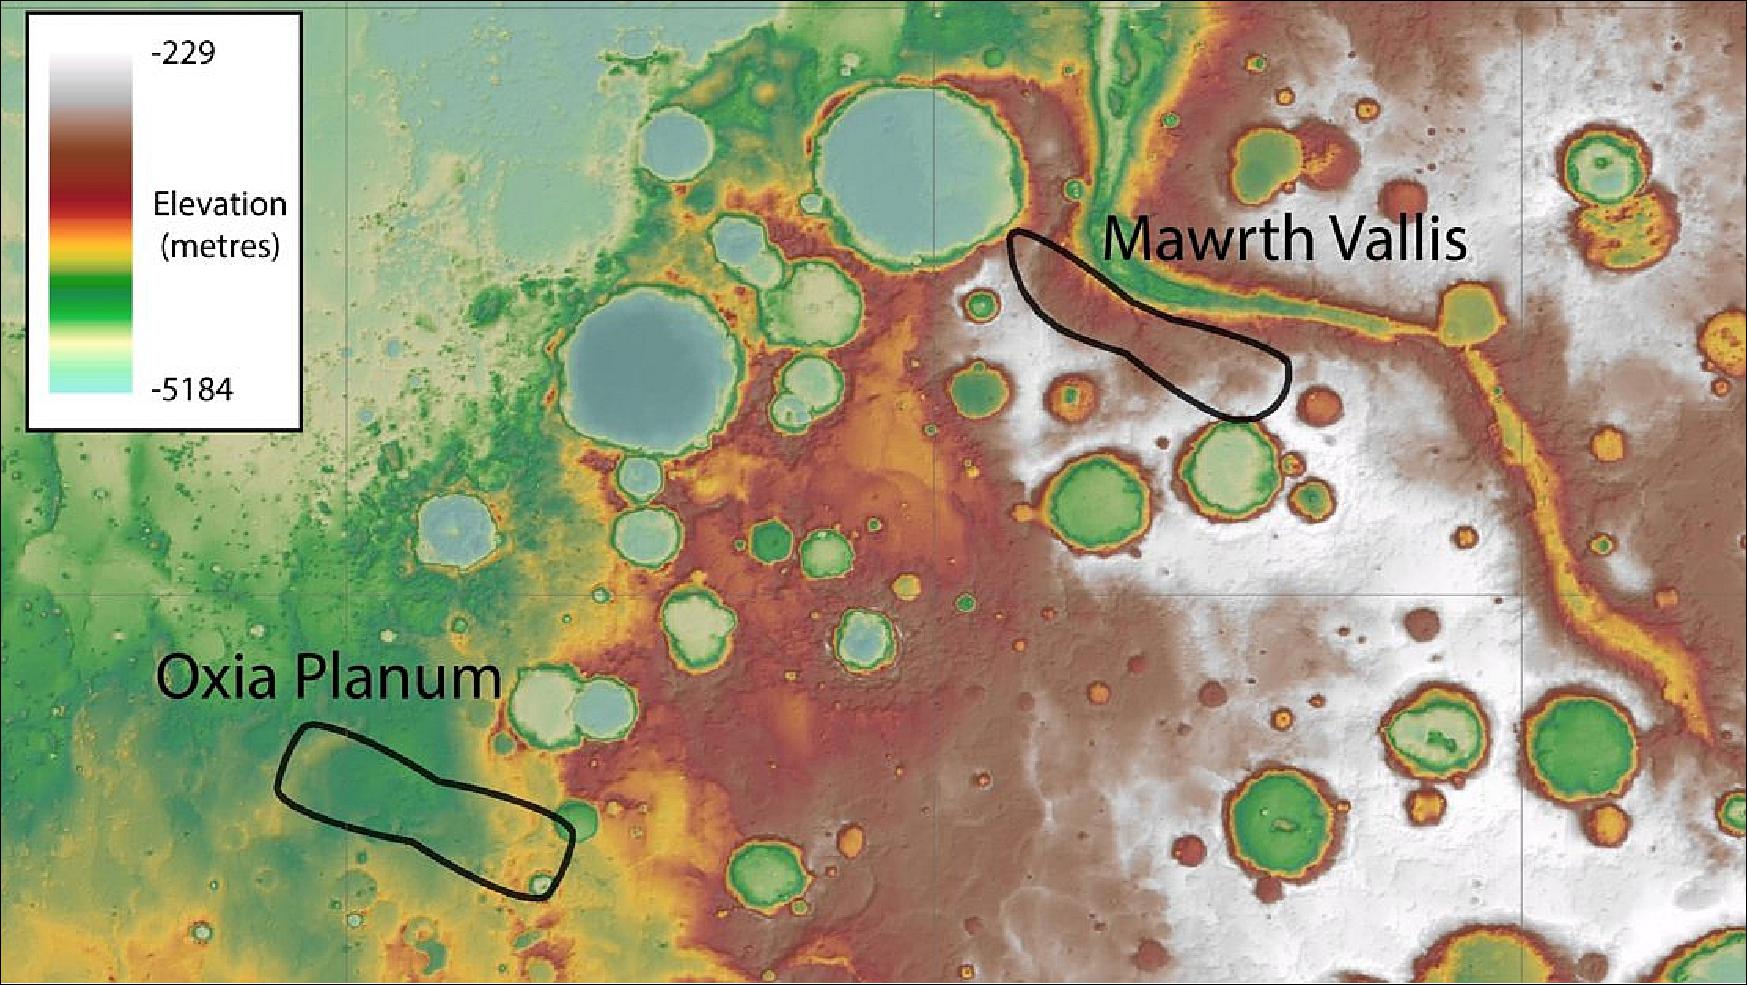 Figure 85: The two candidates for the landing site of the ESA-Roscosmos rover and surface science platform. The study area of each landing site is indicated by the black outline; the shape corresponds to the different landing ellipses defined by factors such as different launch dates within the launch window and, in the case of Mawrth Vallis, local topography constraints resulting in different landing ellipse centers depending on the launch date. The map is color-coded corresponding to elevation: whites and reds are higher than yellows and greens. The data was obtained by the Mars Orbiter Laser Altimeter onboard NASA’s Mars Global Surveyor (image credit: NASA/JPL)